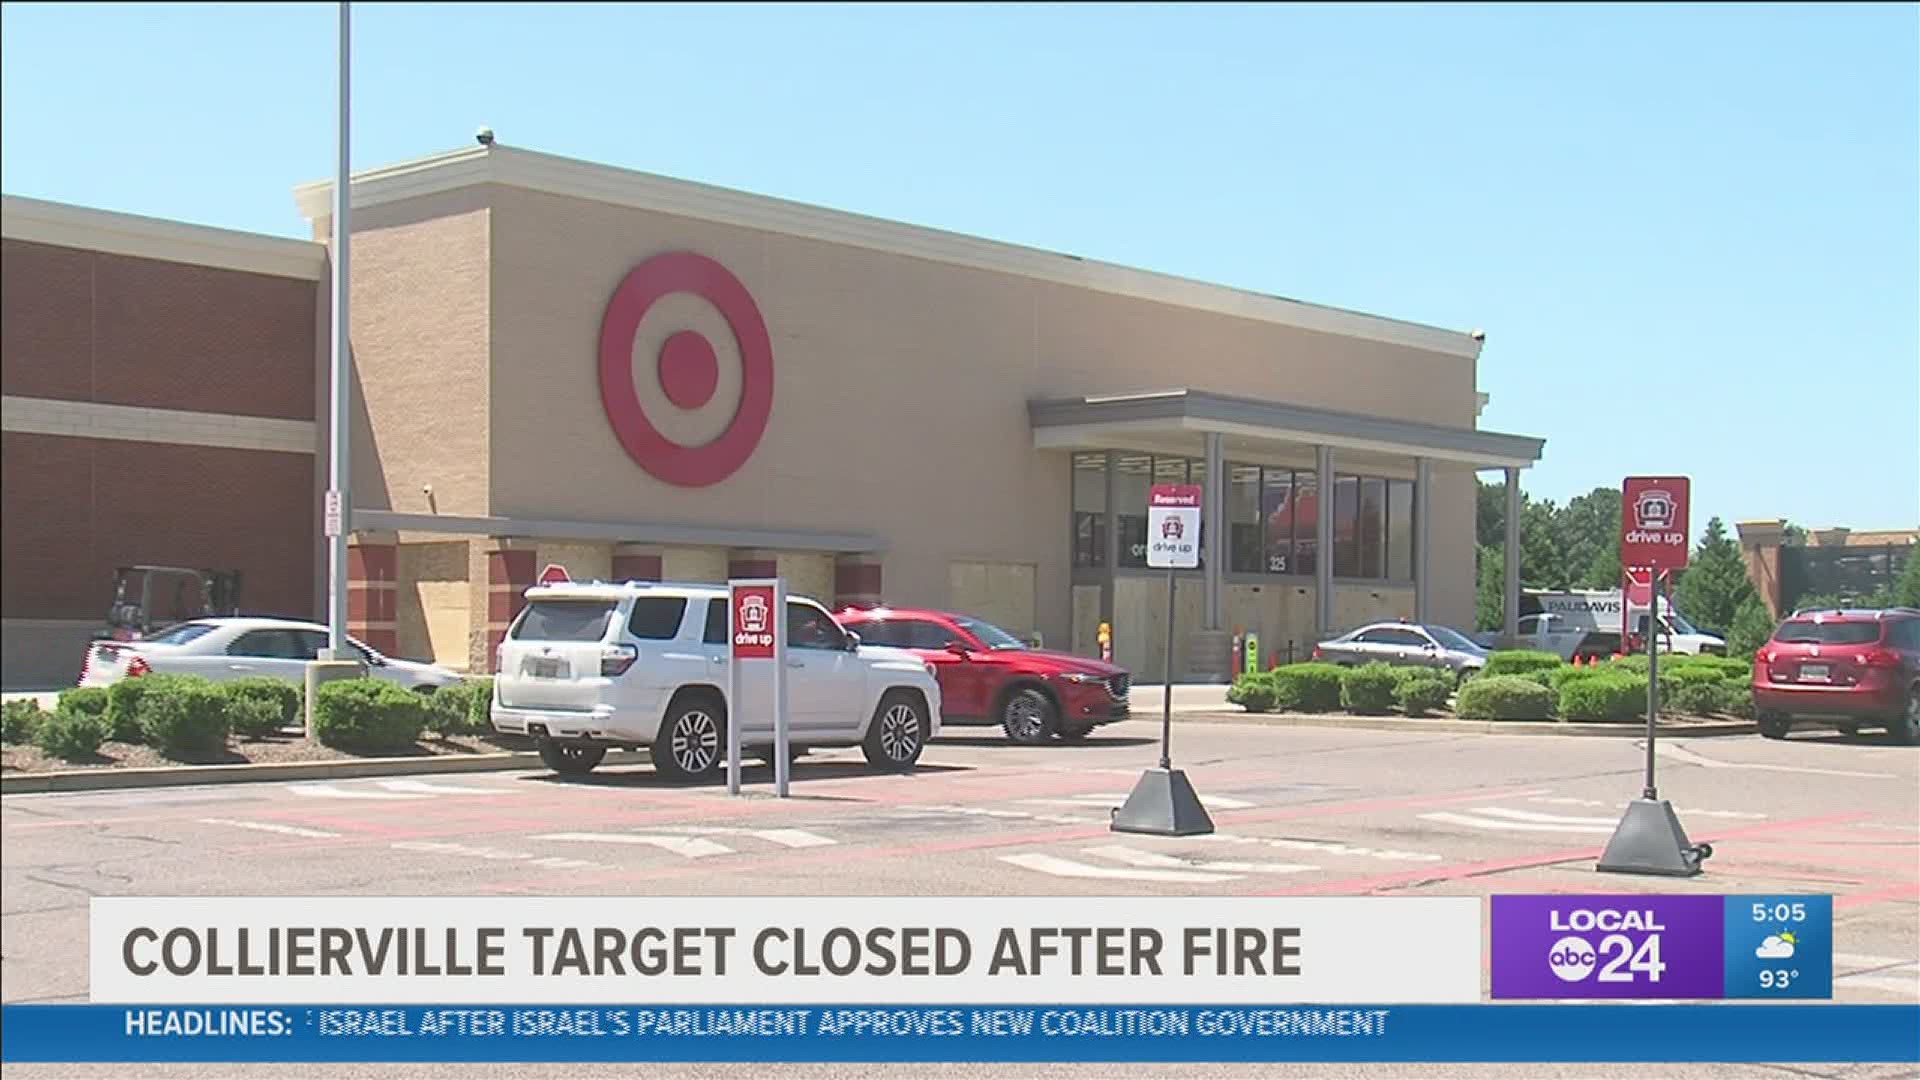 Team members have the opportunity to be reassigned to other nearby stores until the Collierville store reopens